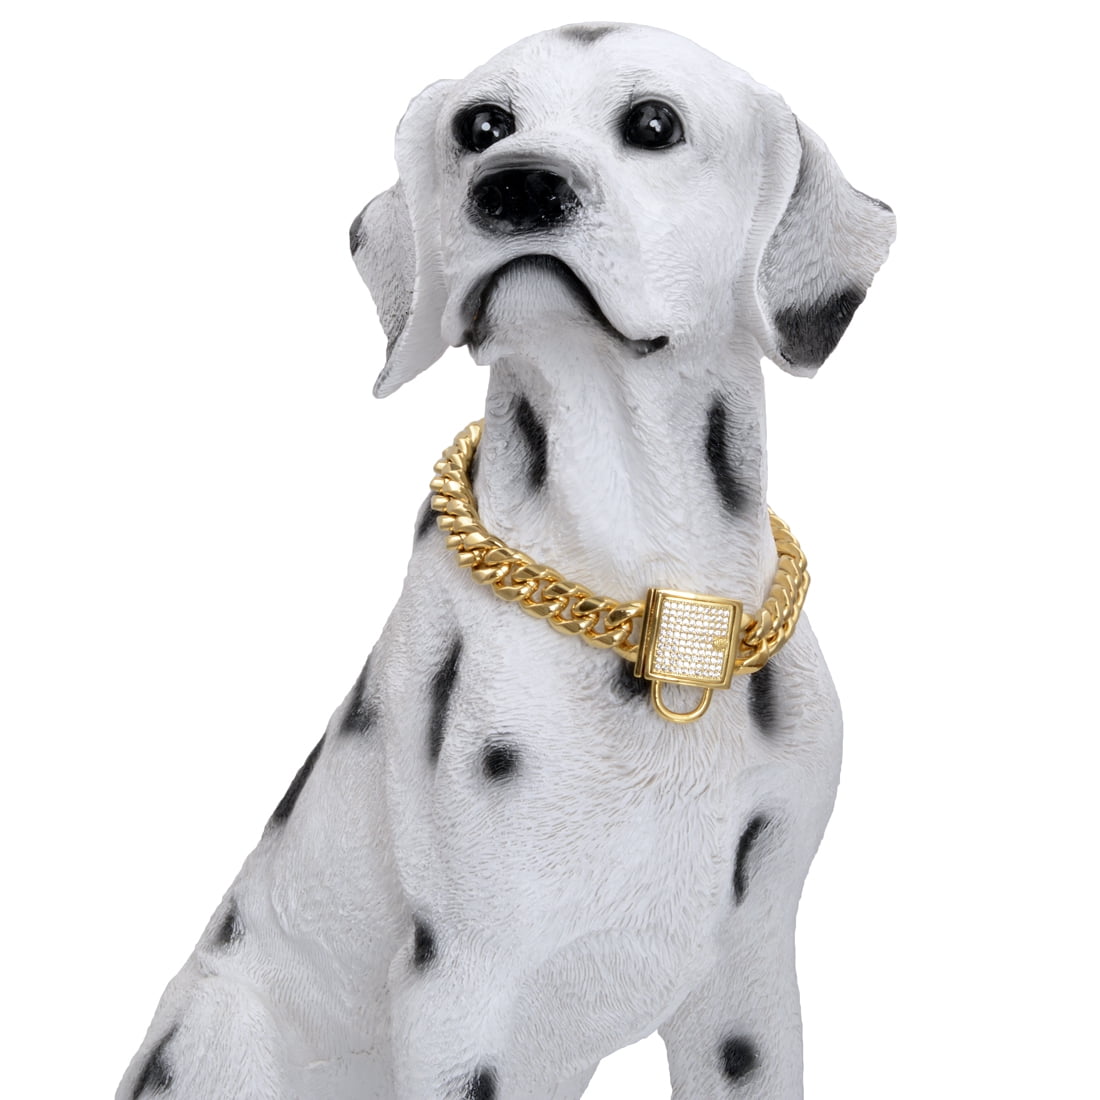 14MM Lifetime Gold Dog Chain Collar,Luxurious 18K Cuban Link Strong Heavy Duty Chew Proof with Design Secure Buckle,for Medium Large Dogs or Bully